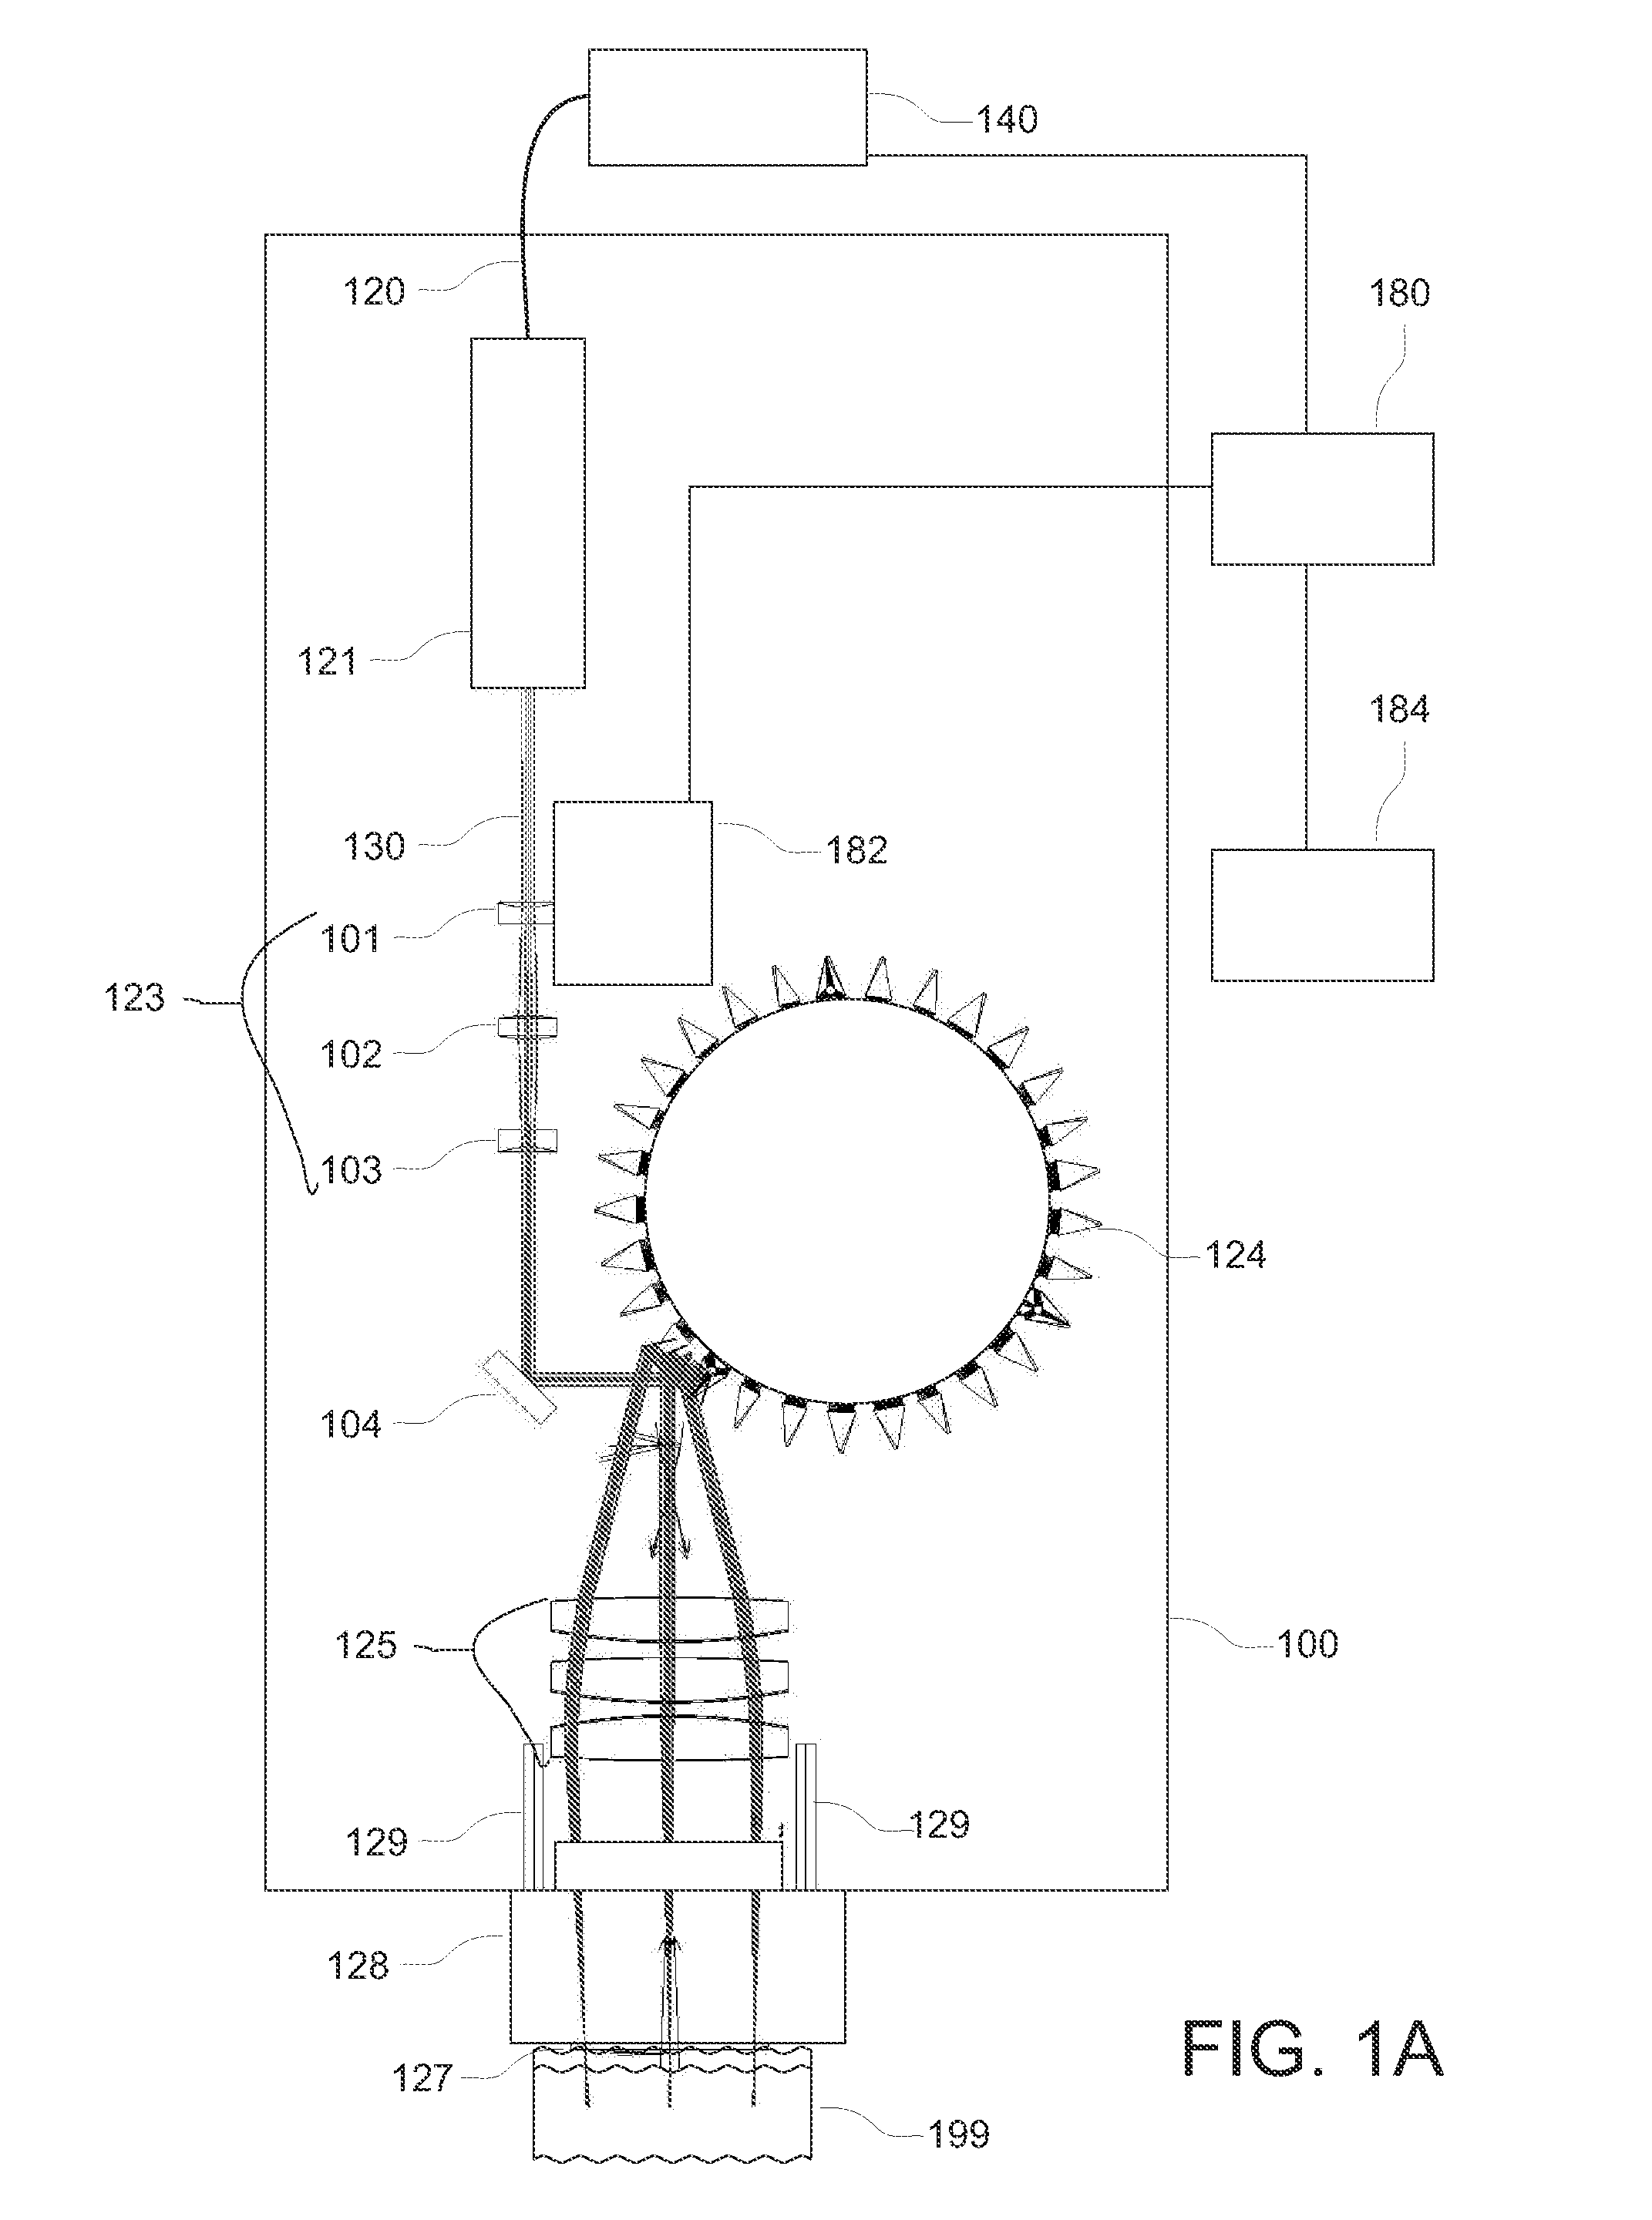 Apparatus and Method for Adjustable Fractional Optical Dermatological Treatment